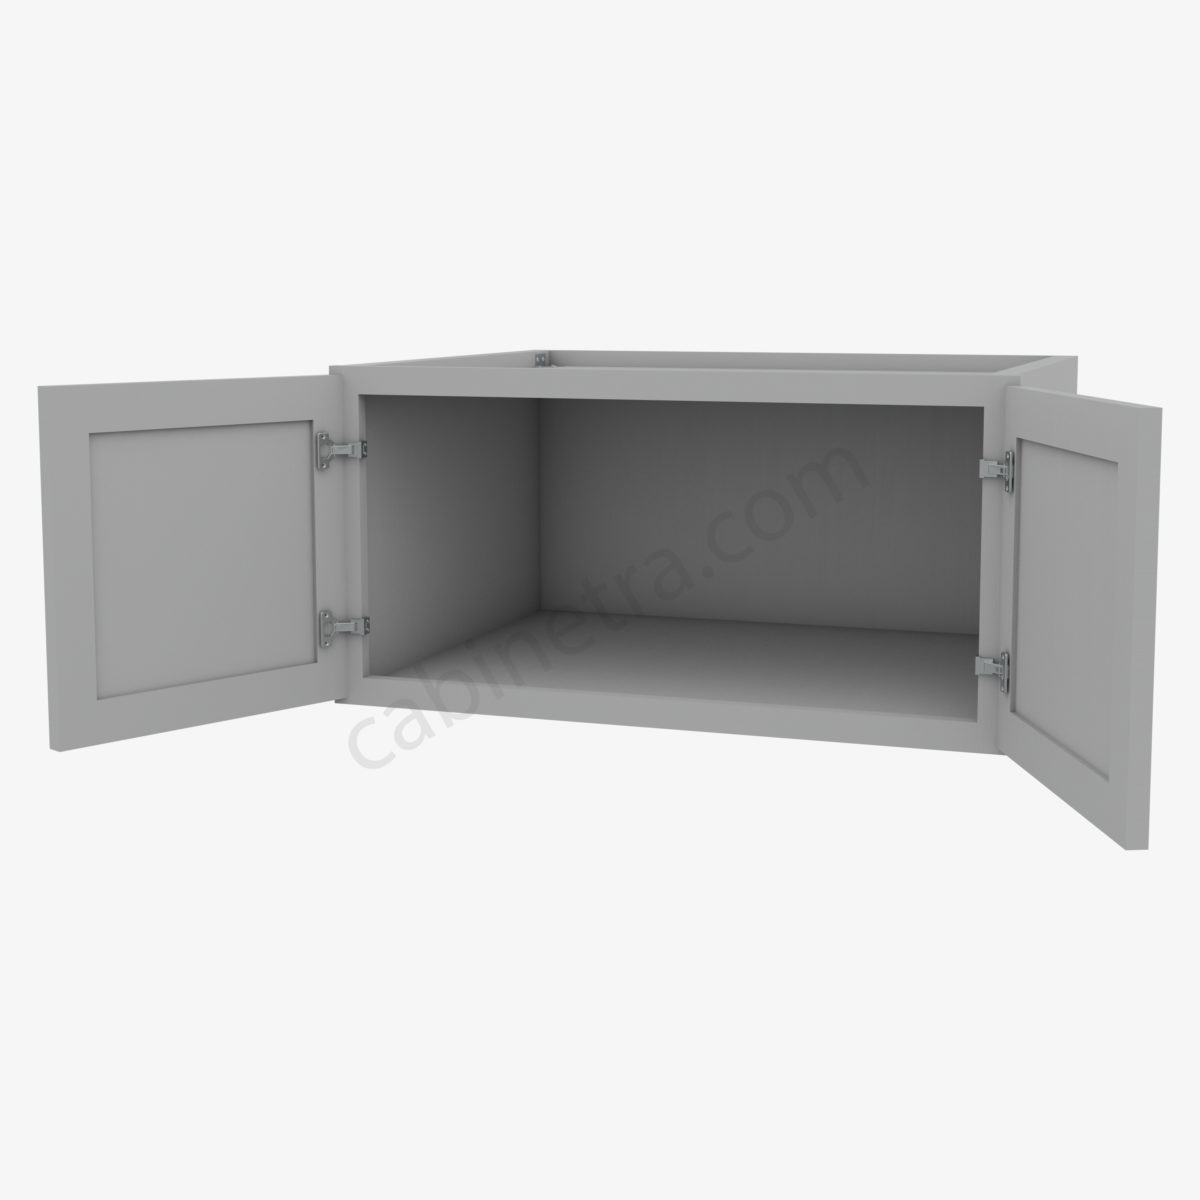 AB W301524B 5 Forevermark Lait Gray Shaker Cabinetra scaled